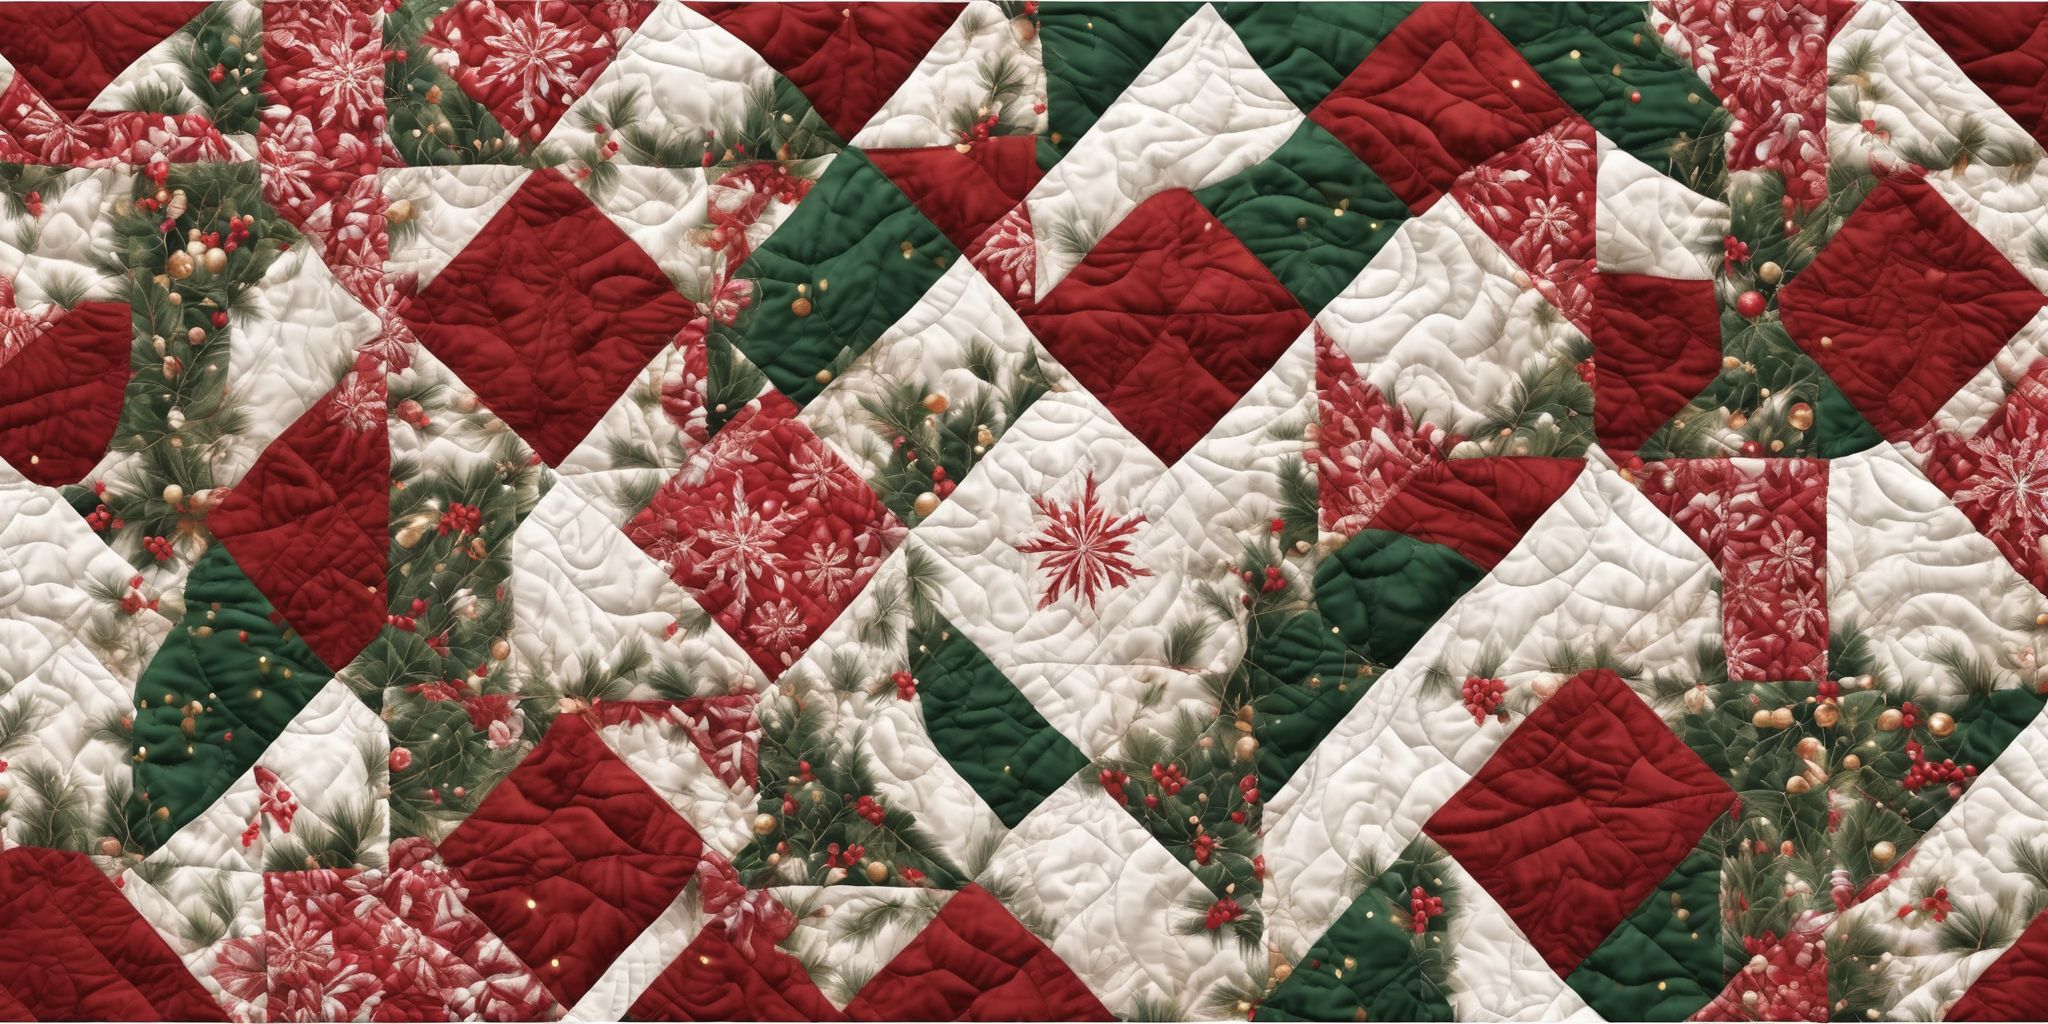 Quilt in realistic Christmas style